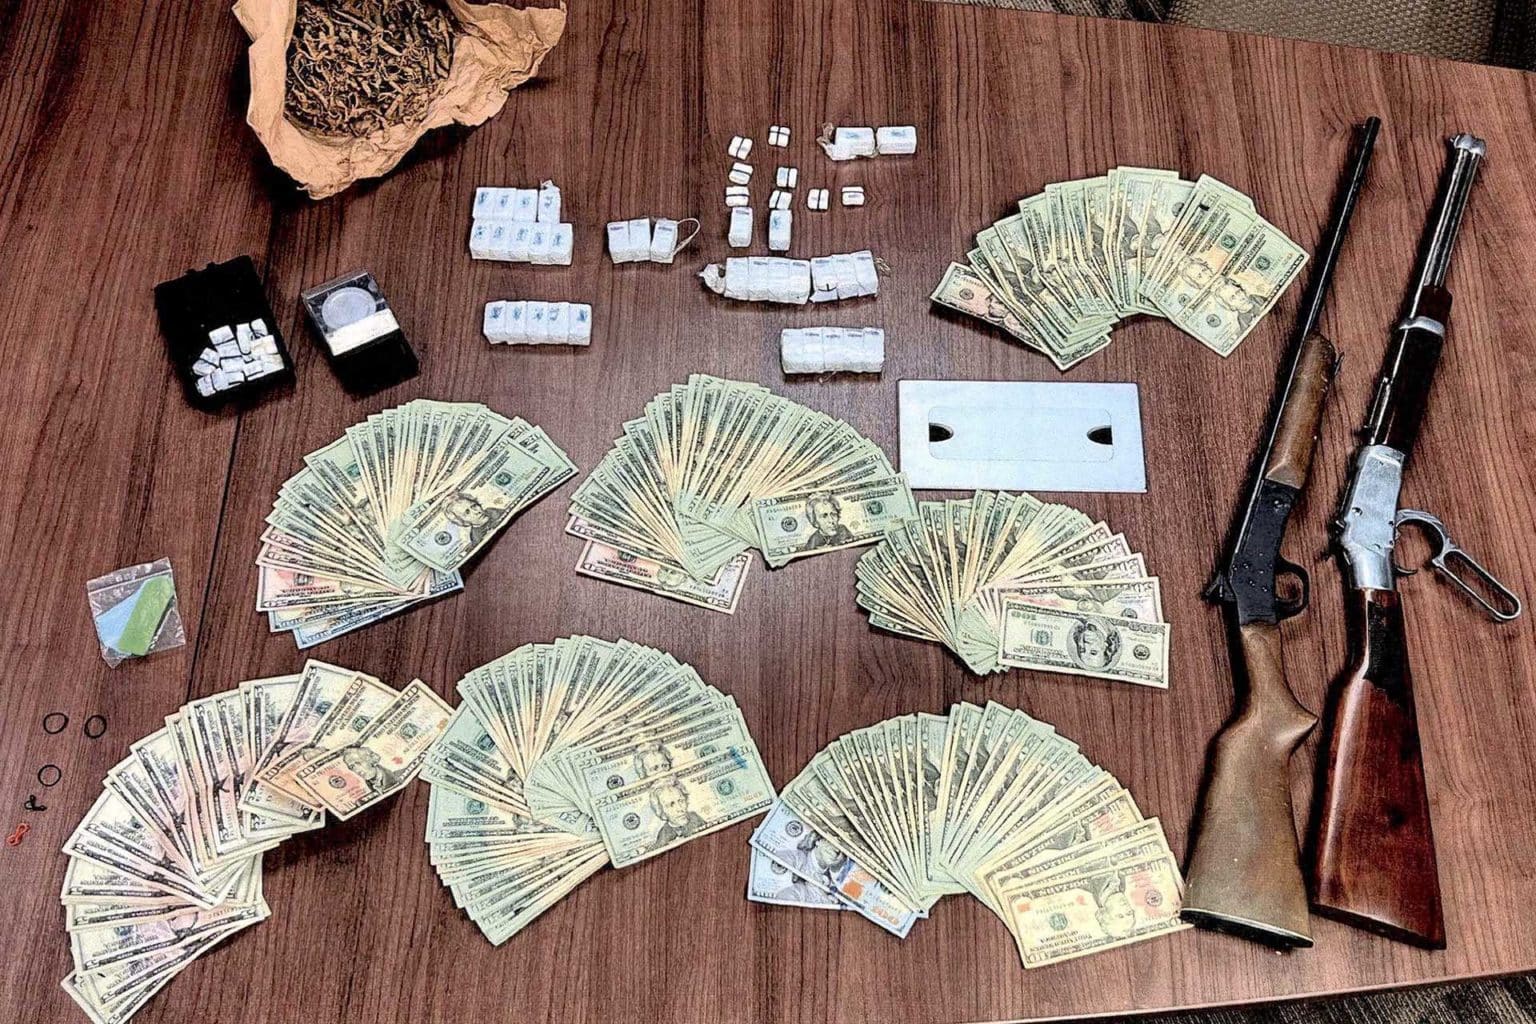 15 people arrested in Upshur County as police seize guns, drugs and cash